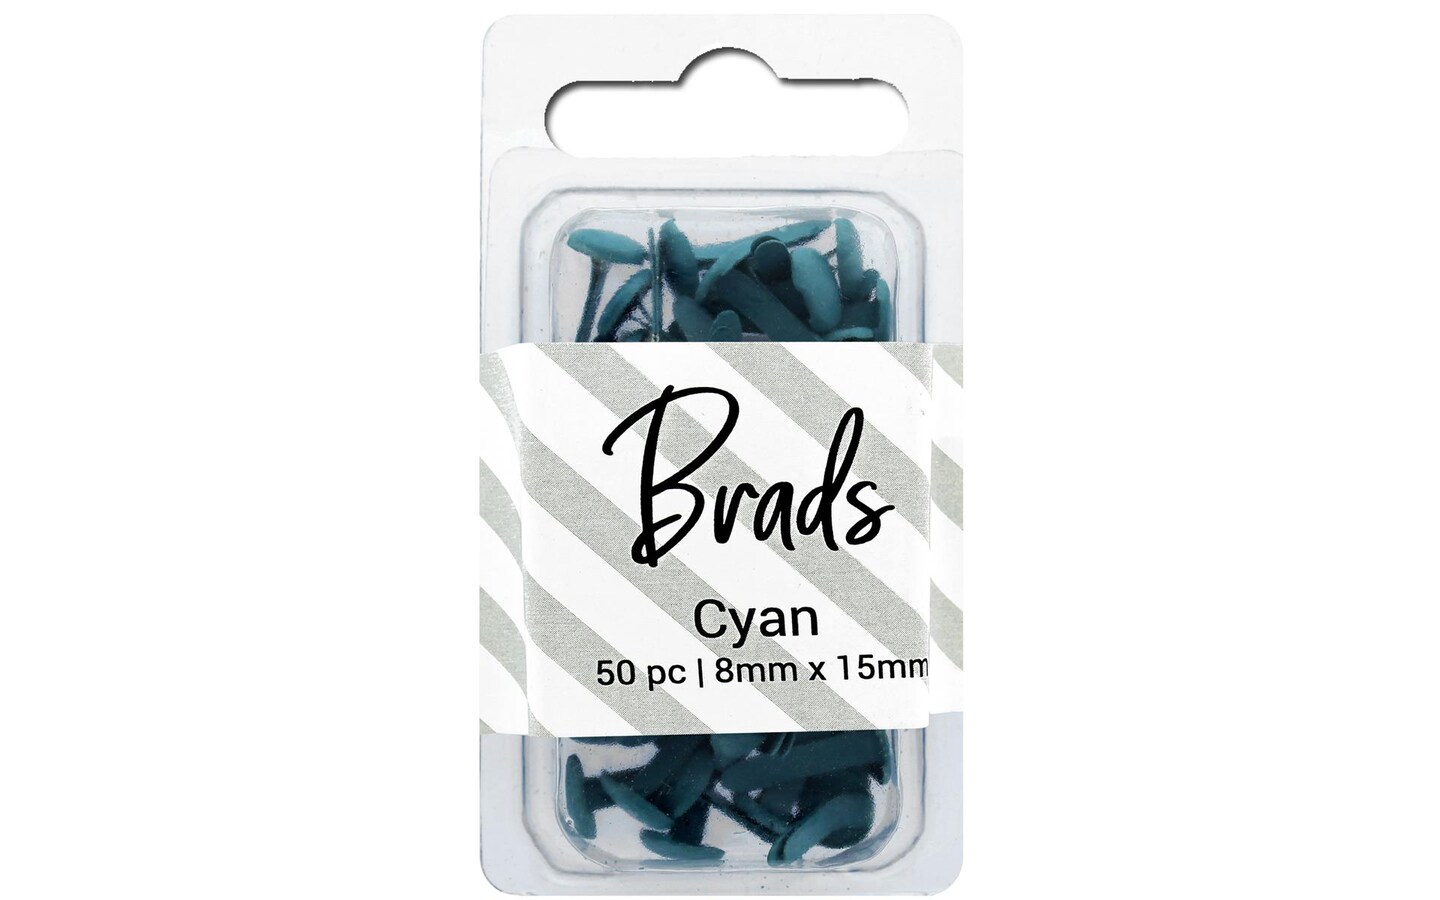 Accent Design Paper Accents Brads 4.5mm x 8mm 100pc Solid Cyan